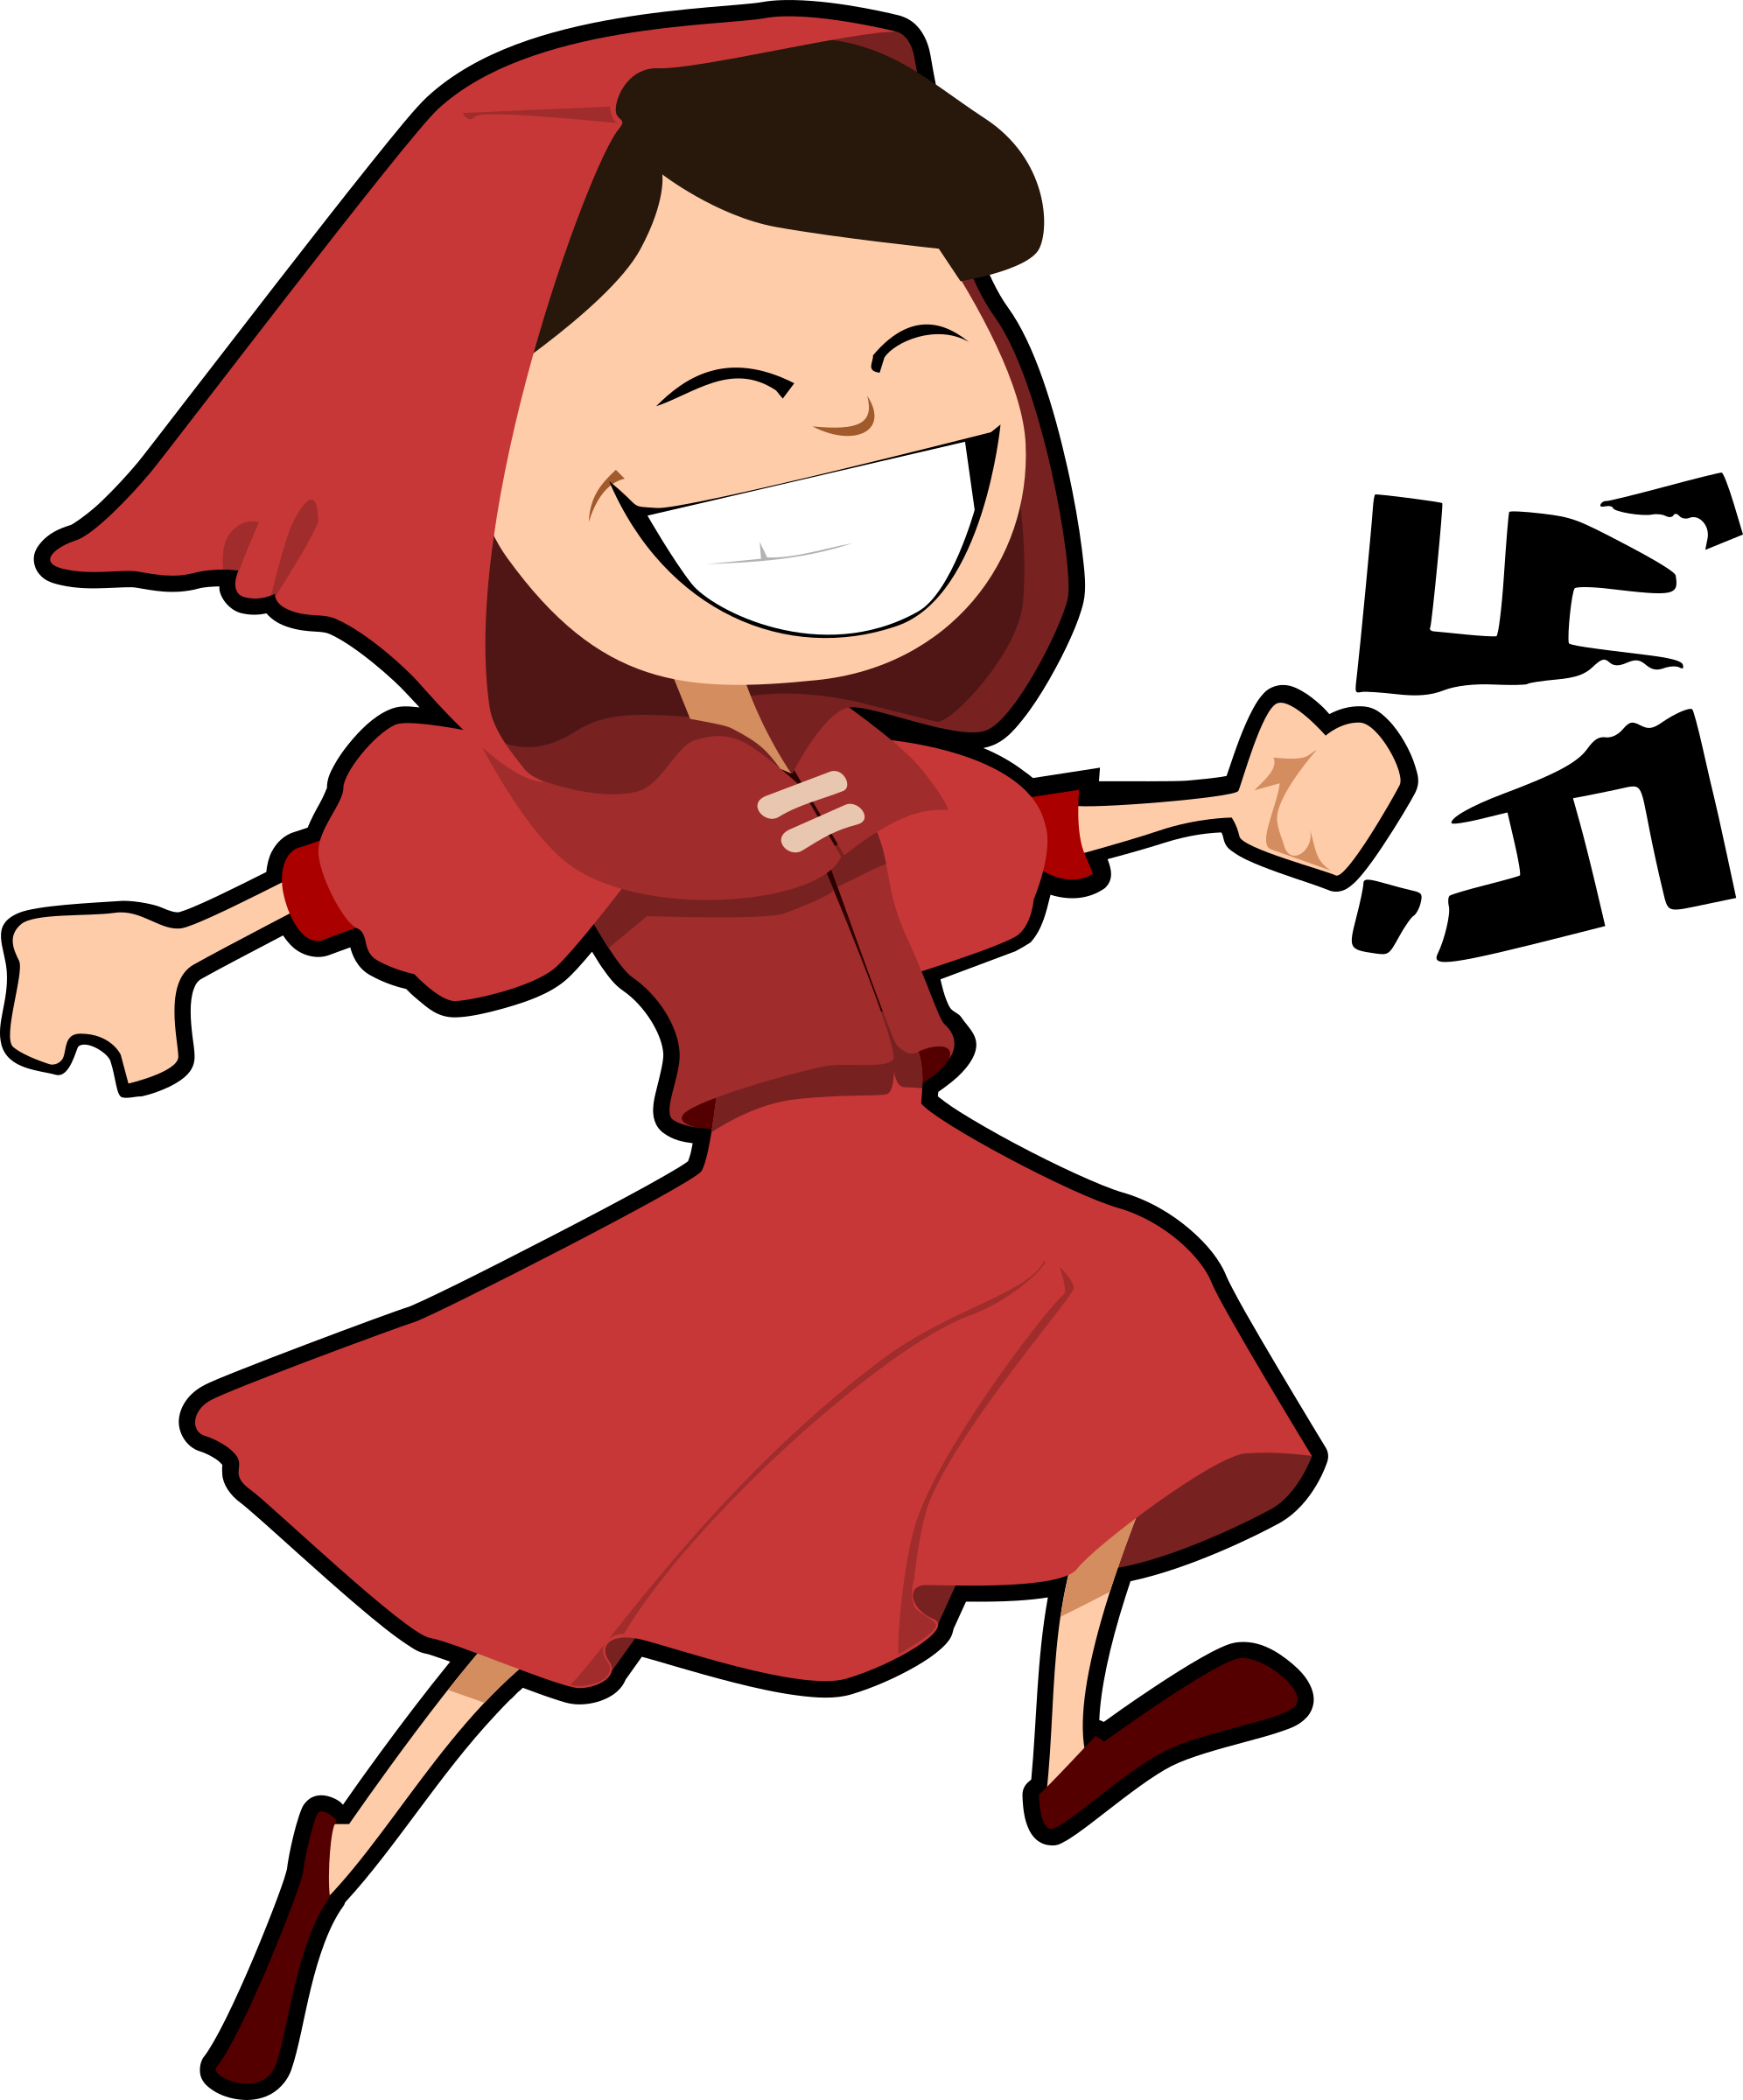 Red Riding Hood svg #5, Download drawings